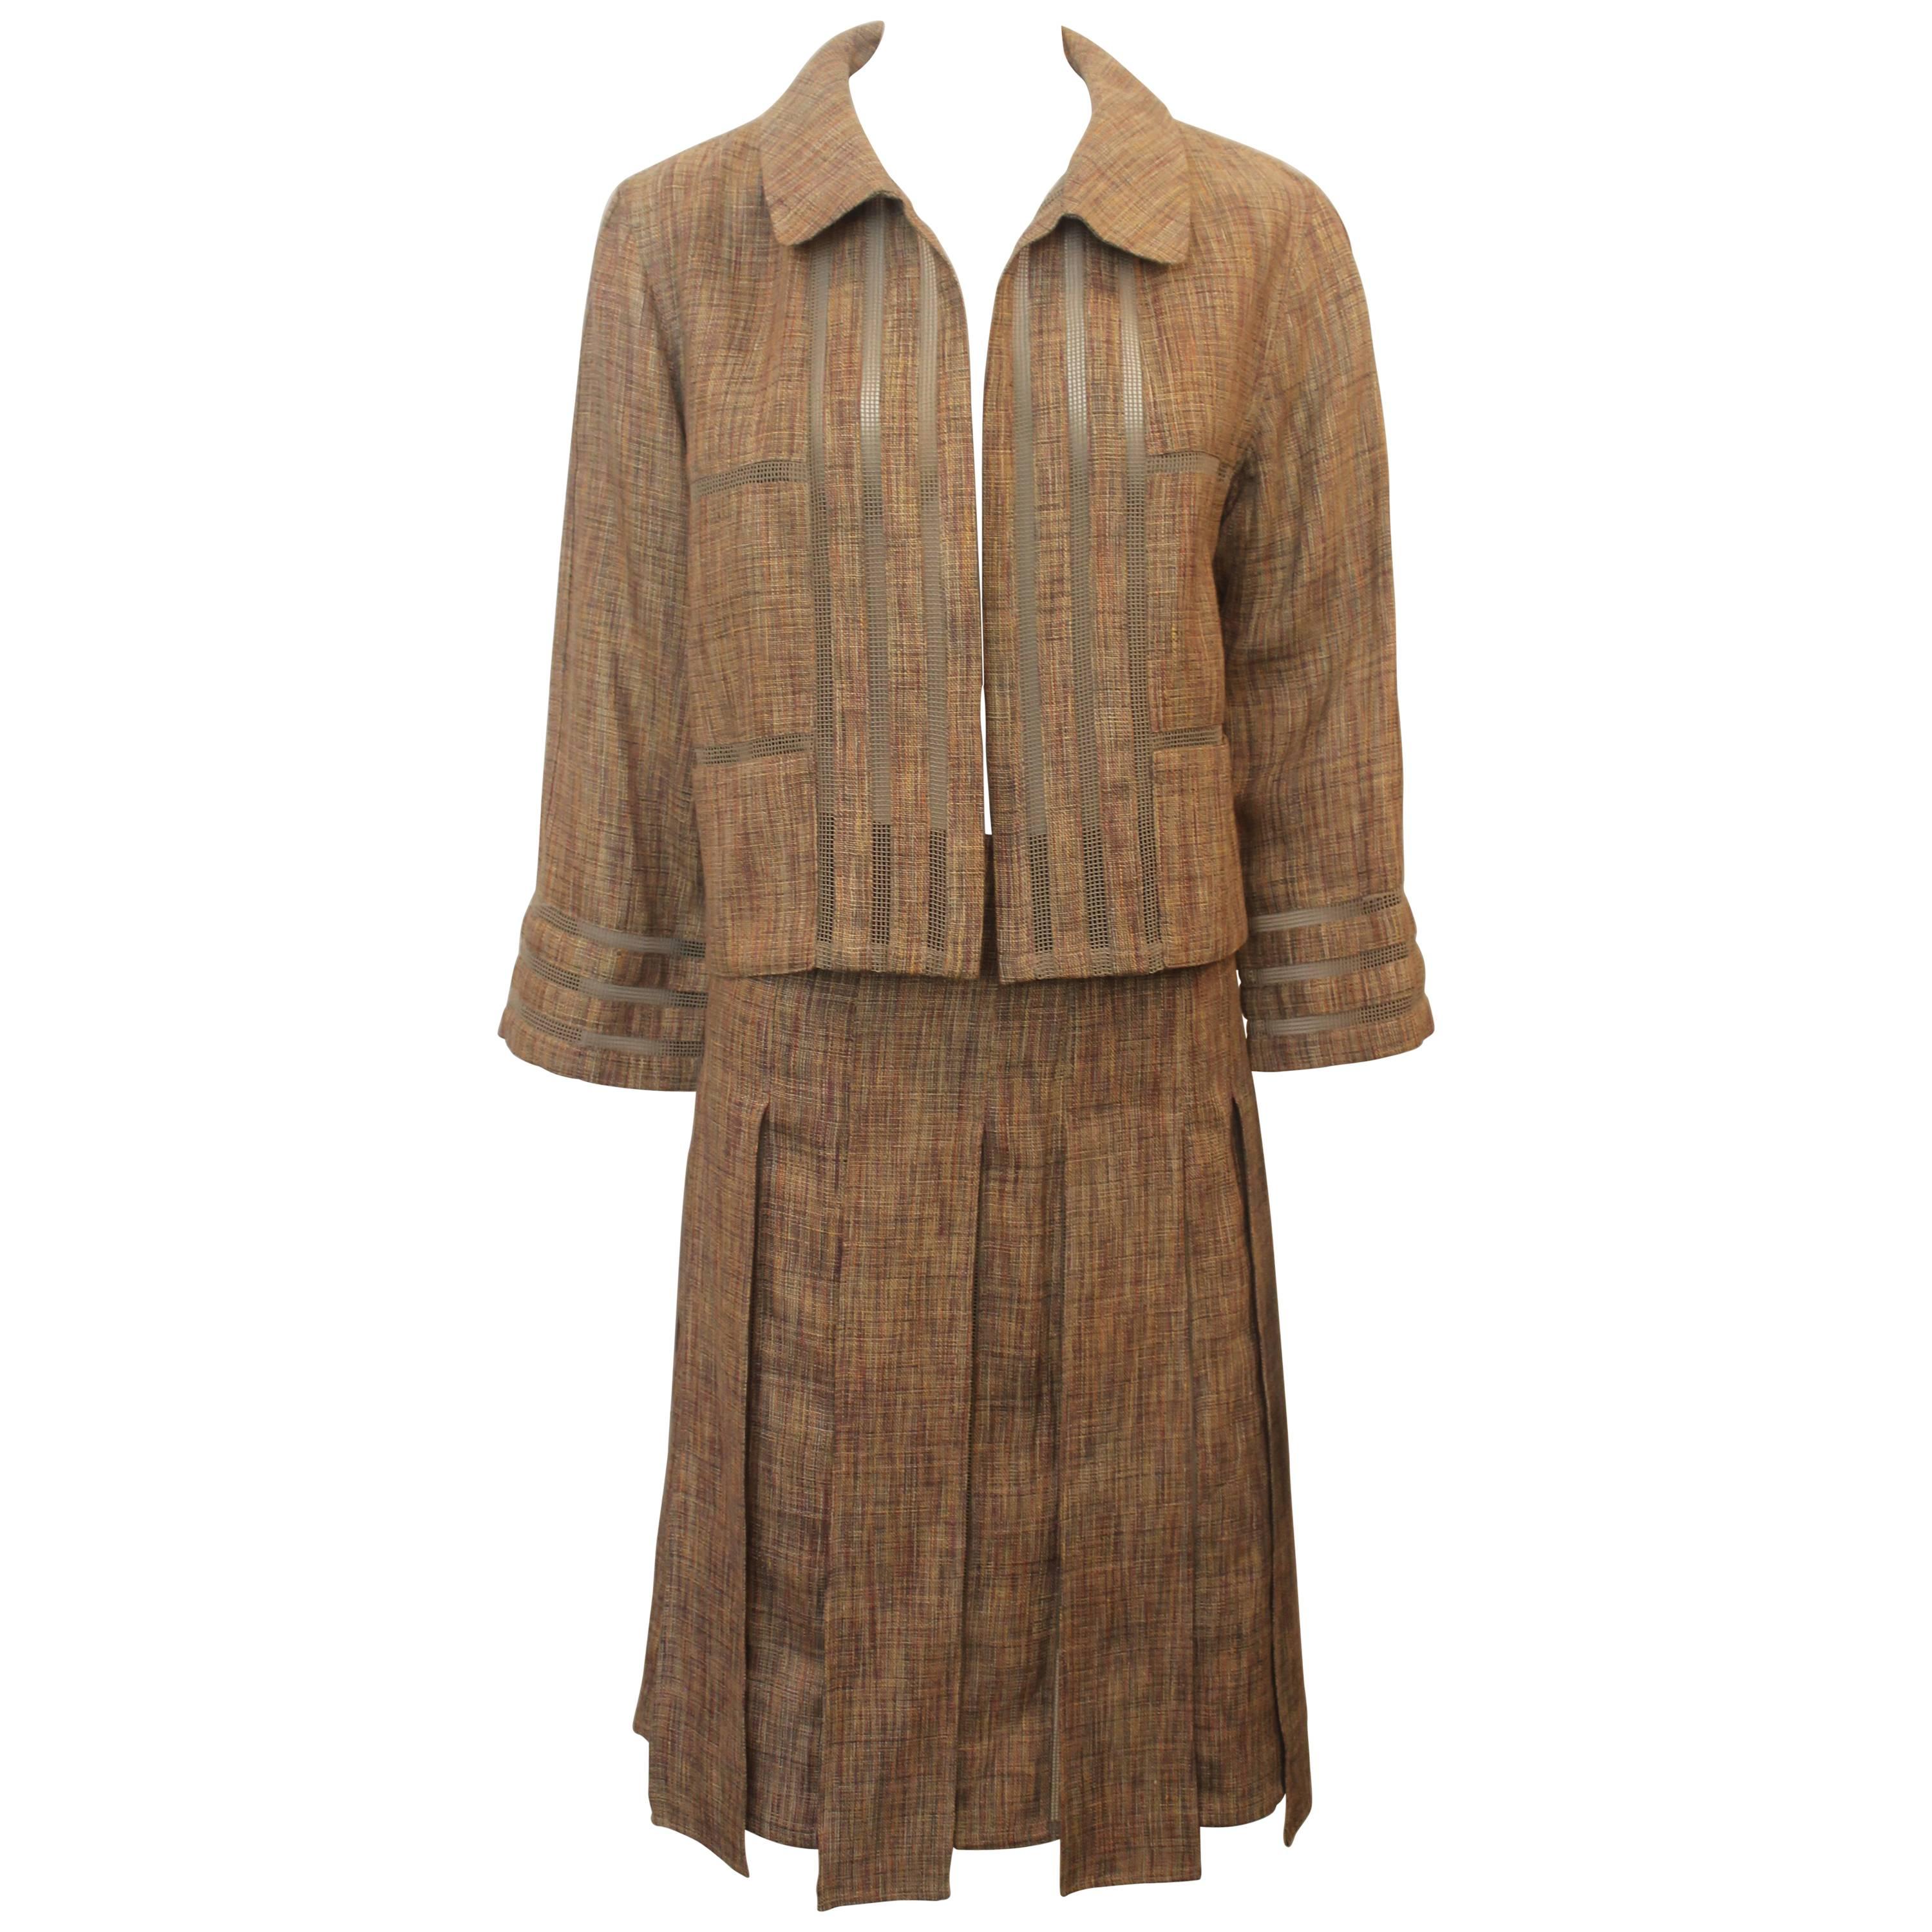 Chanel Earthtone Linen Blend Skirt Suit with Mesh Detail - 38 - 99P For Sale